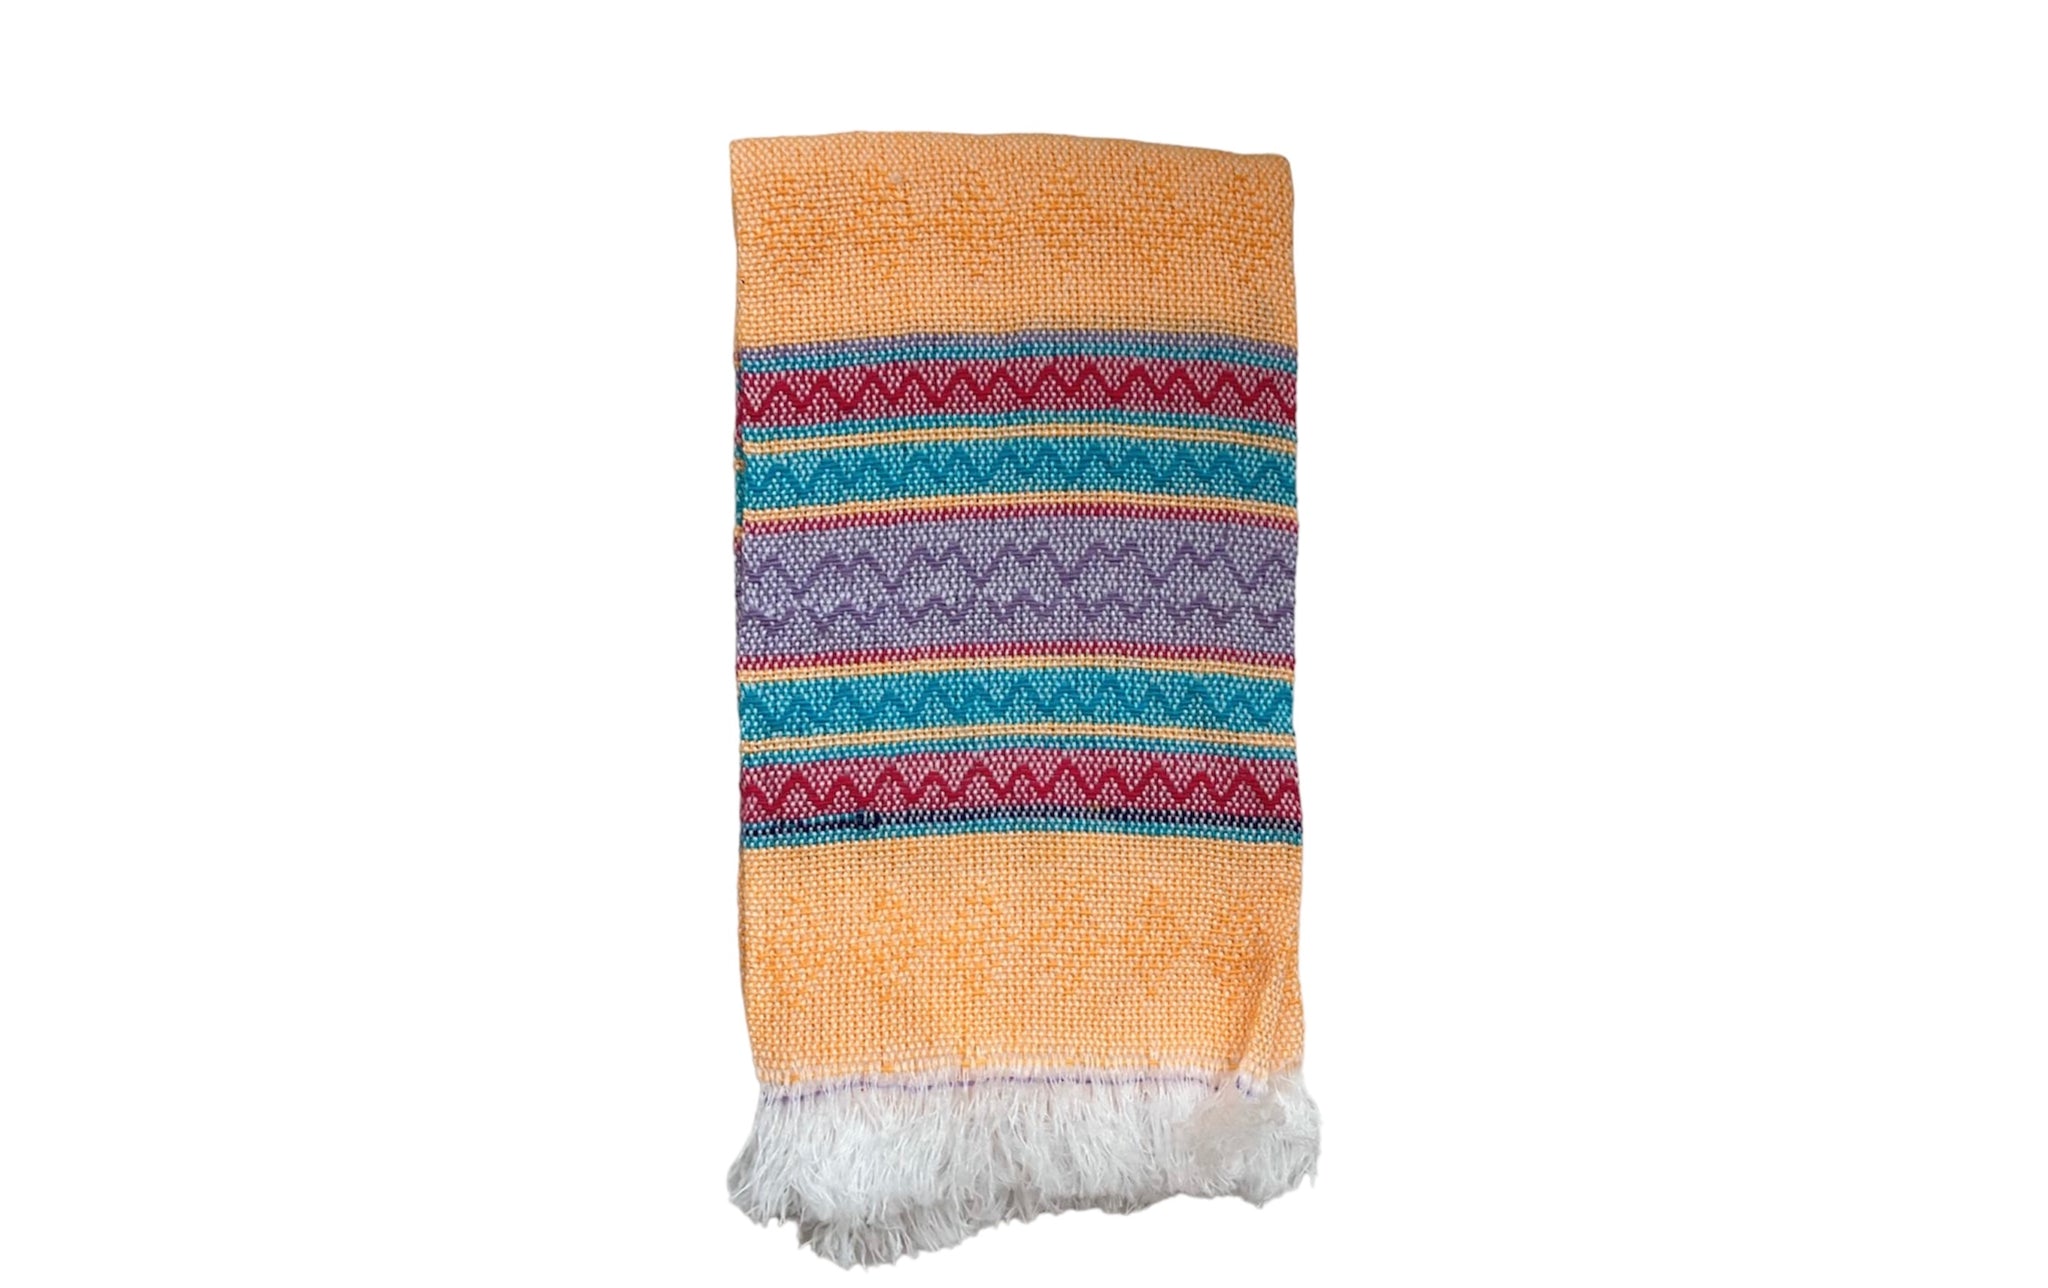 Small Mexican Towel 17x6 in | Turkish Towel